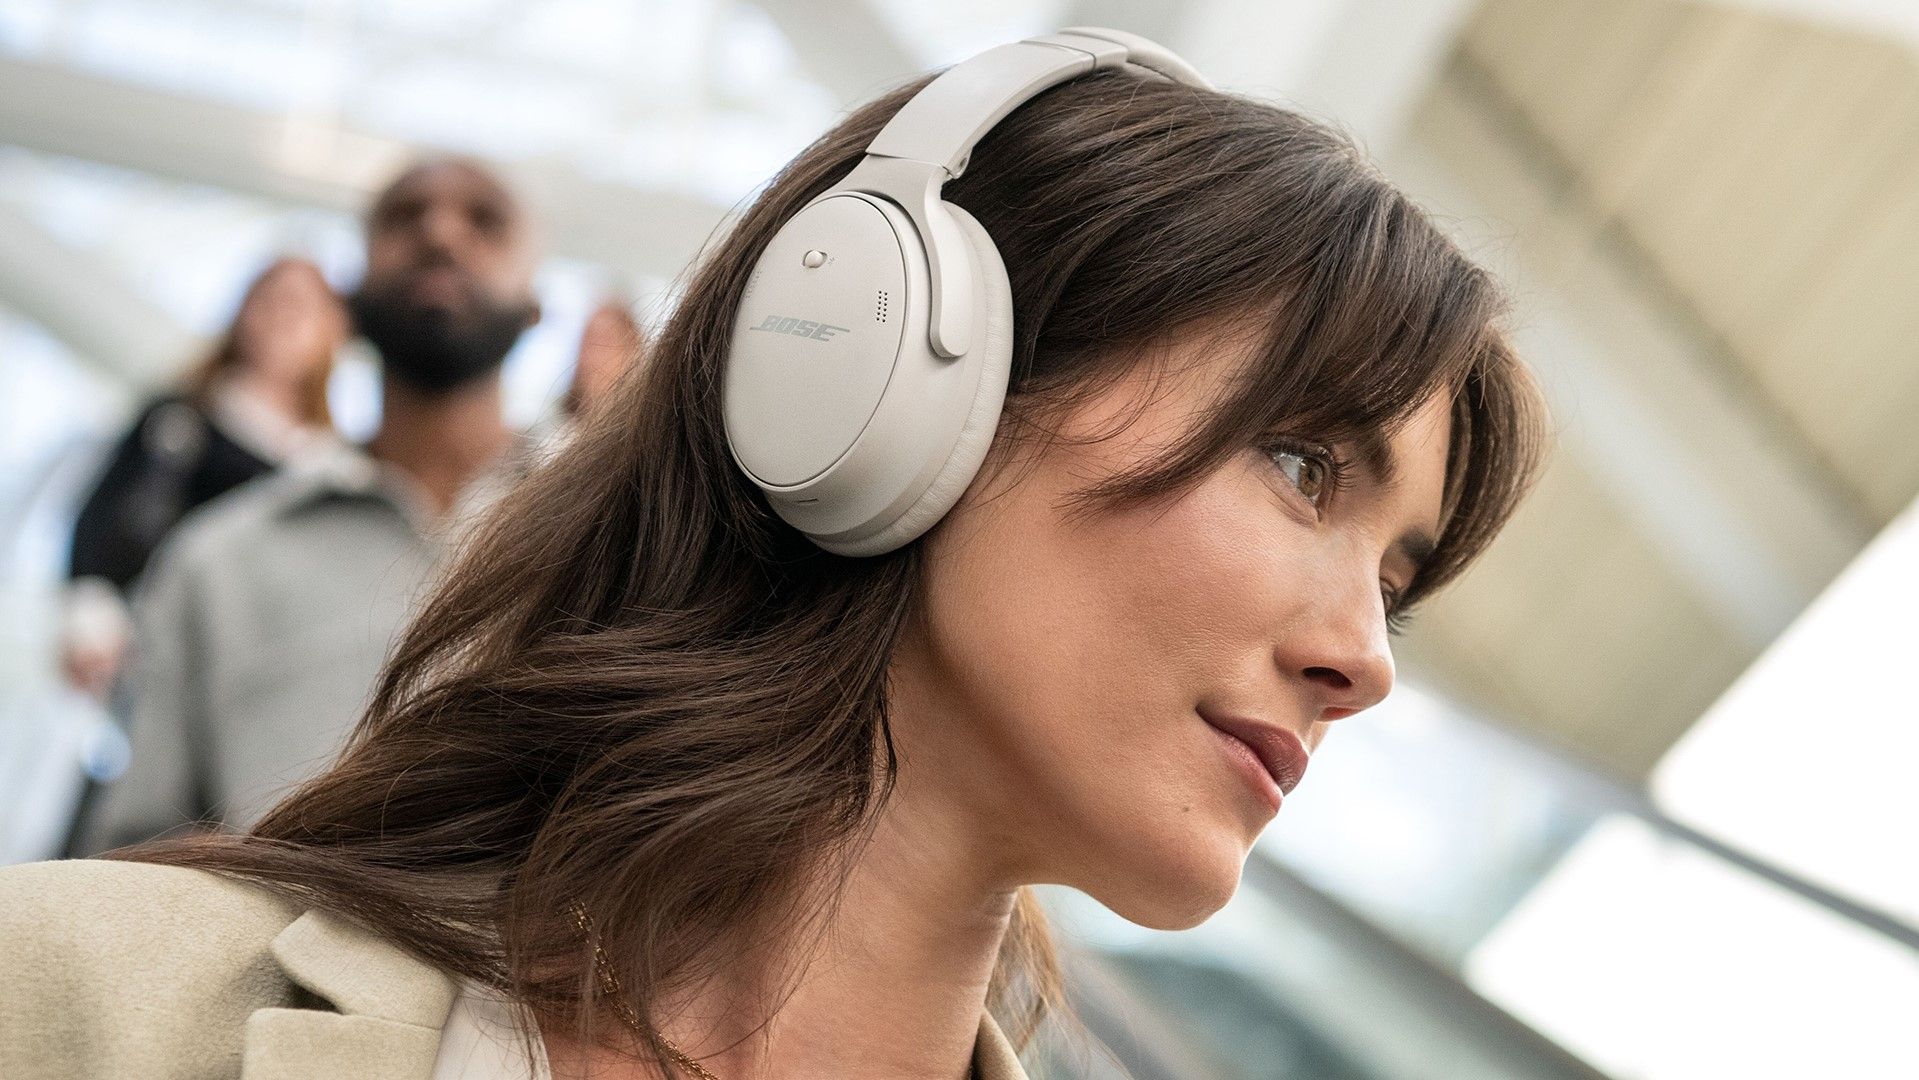 Yet another Bose leak shows off a new pair of headphones